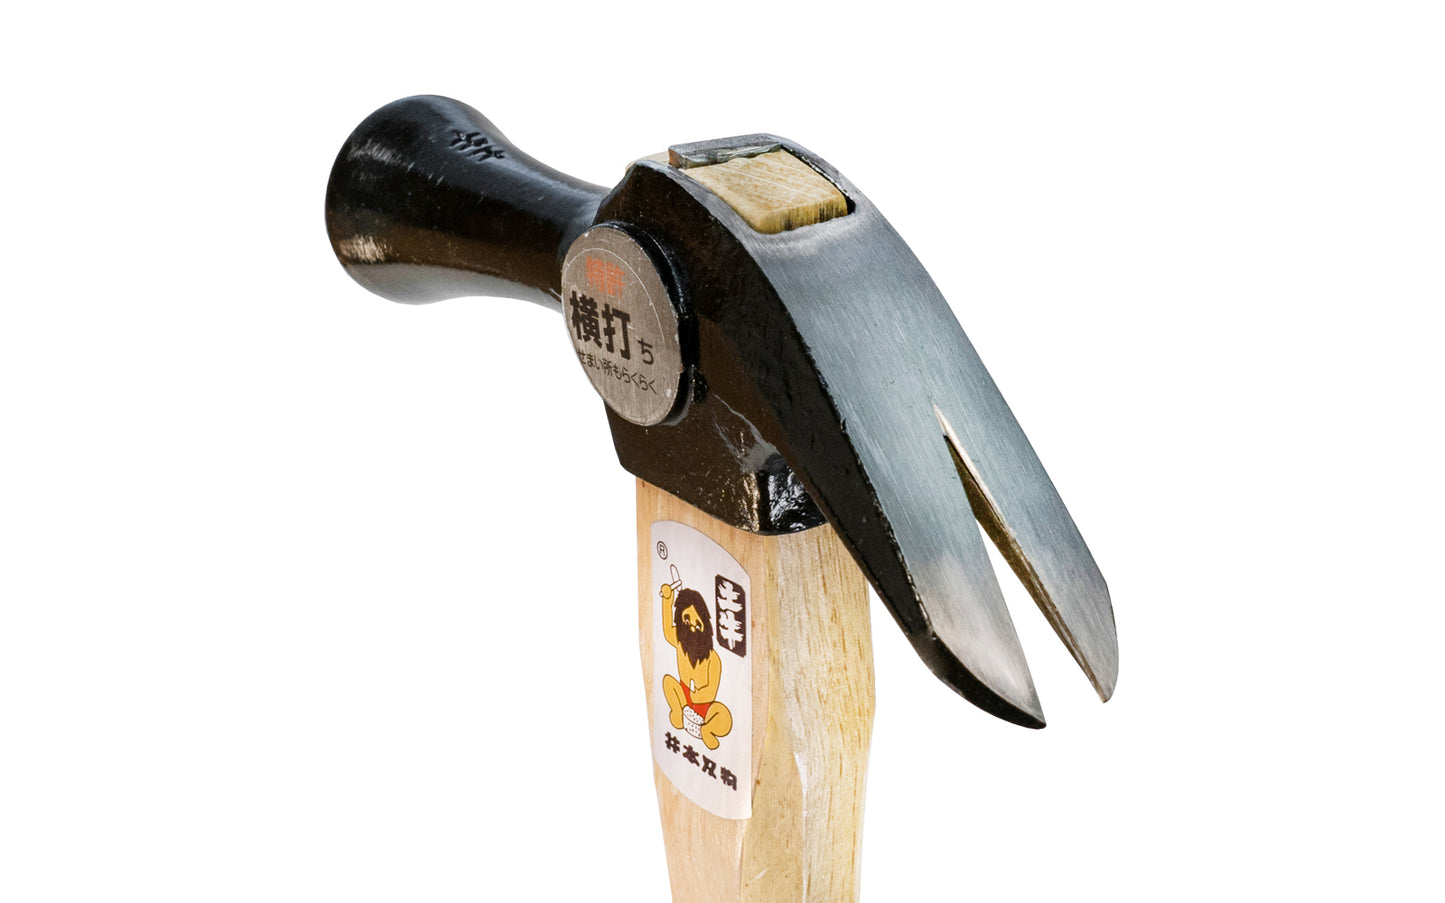 This smooth face Japanese Dogyu Kariwaku hammer is a good all-purpose hammer that's great for framing work. Hammer claw is shorter than most hammer claws, resulting in more leverage in nail pulling. Wooden handle is made of Japanese White Oak - Weight:  690 g  /  24.33 oz - 4962819001035 - 390 mm (15-1/2") Length 